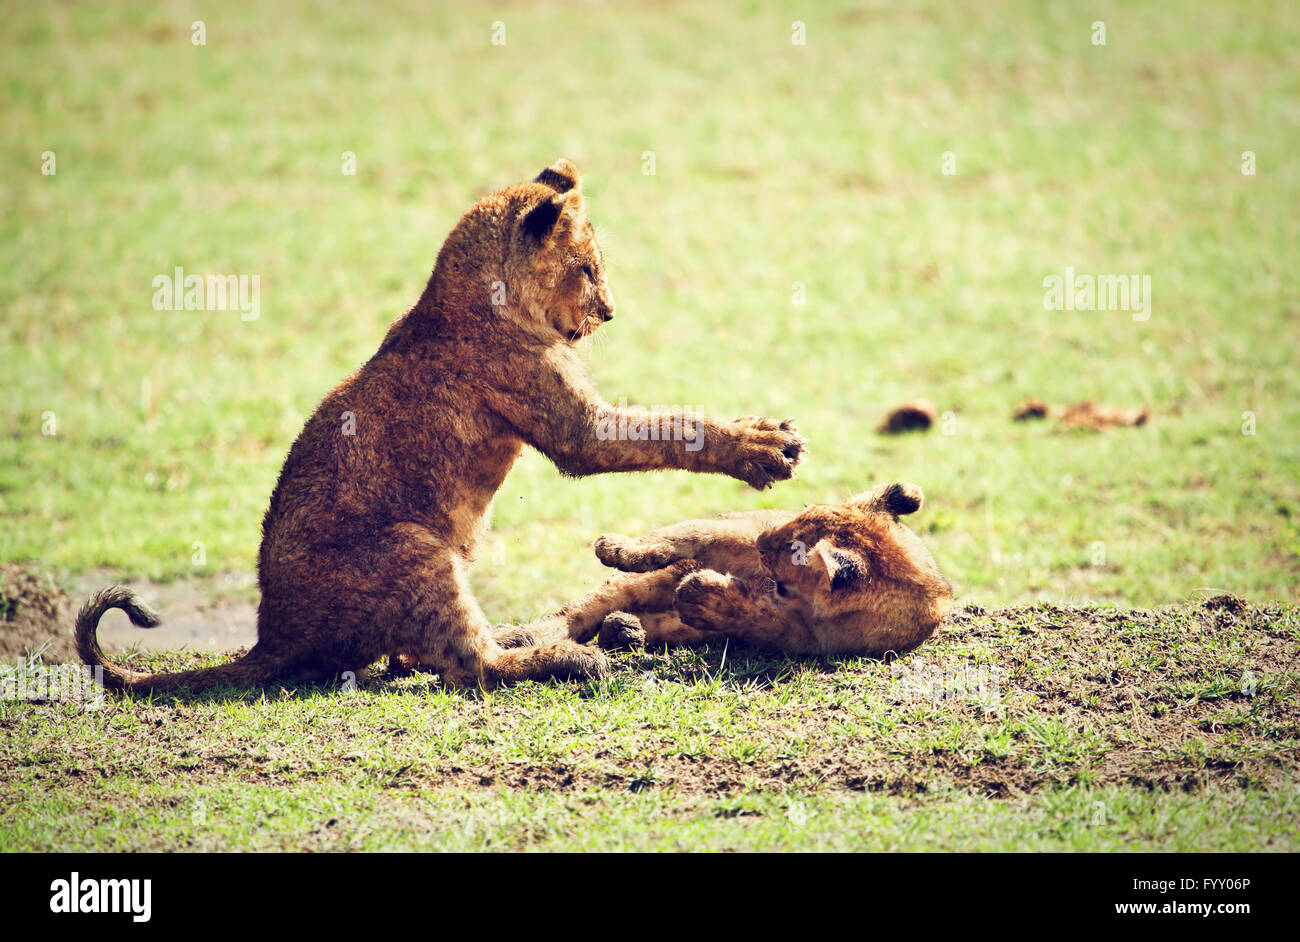 Small lion cubs playing. Tanzania, Africa Stock Photo